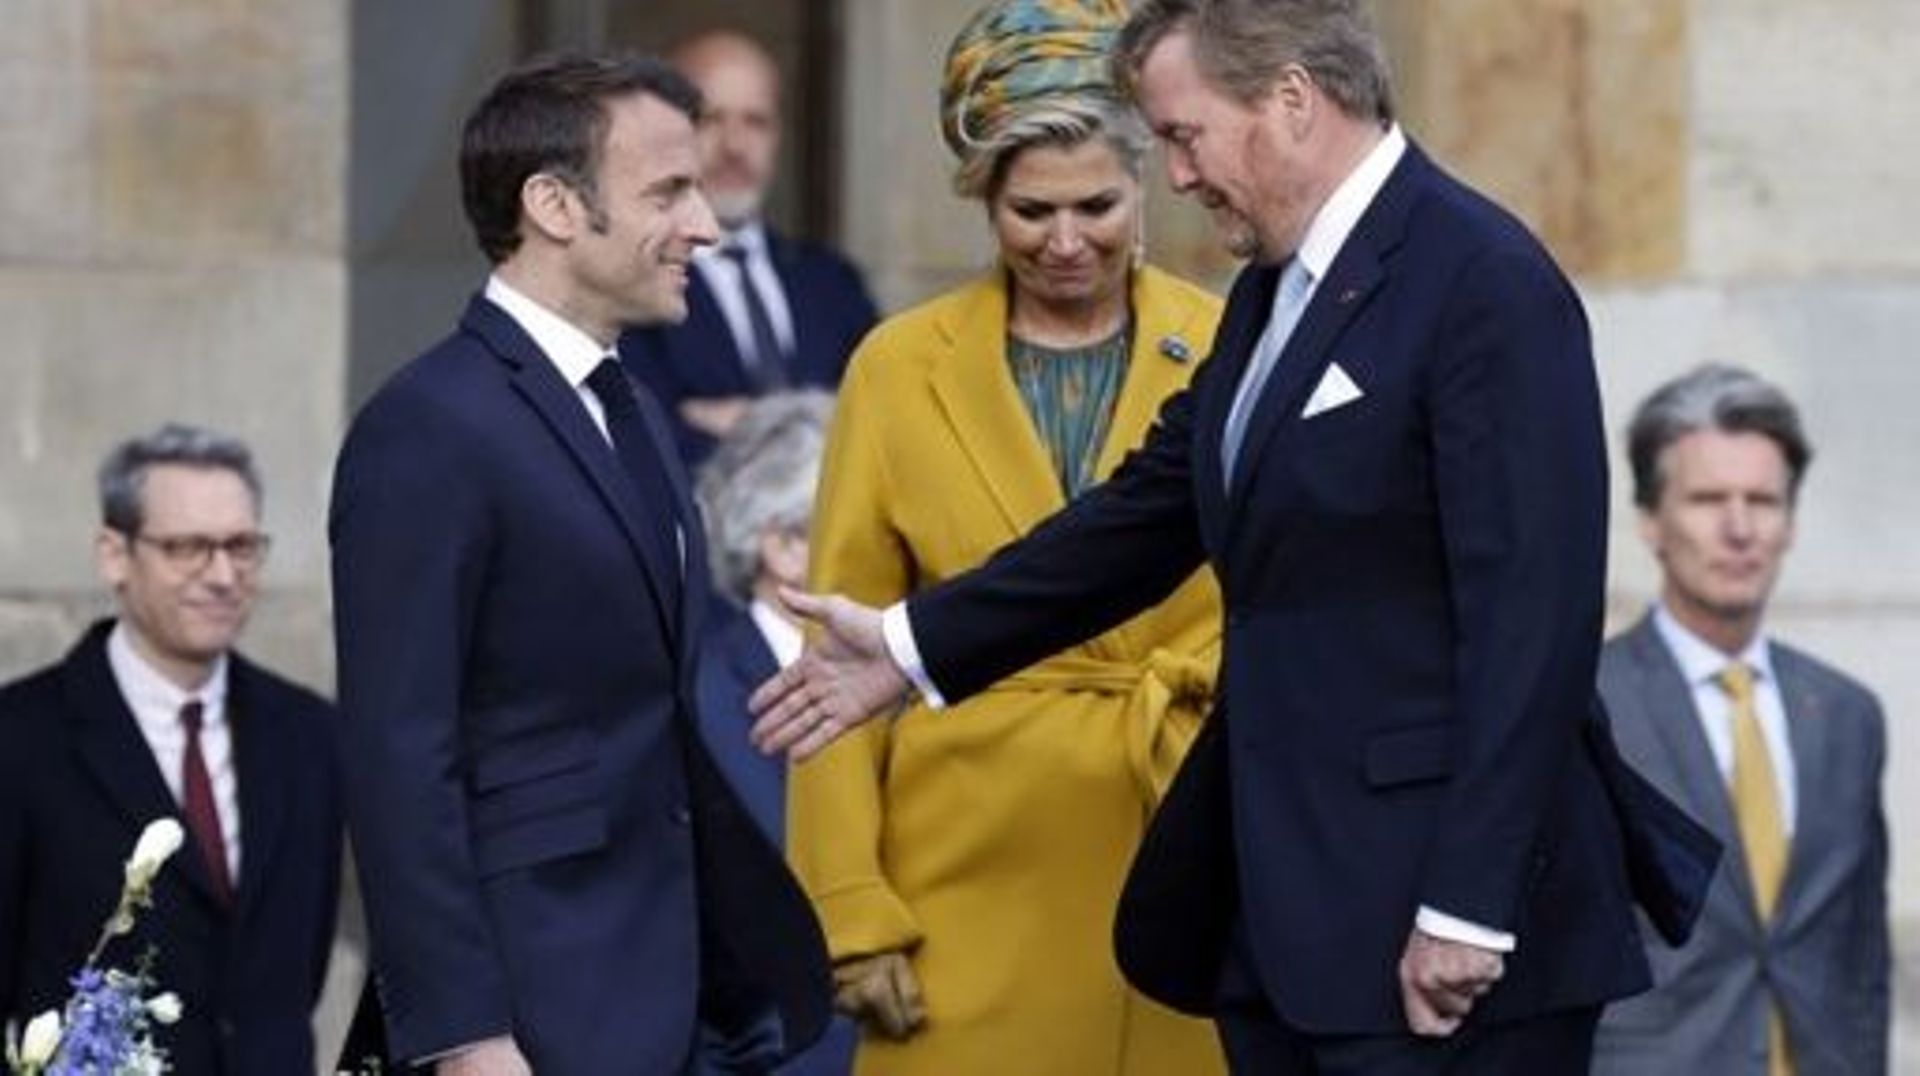 French President Emmanuel Macron (L) is welcomed by King Willem-Alexander of the Netherlands (R) and his wife Maxima during a welcoming ceremony in The Hague on April 11, 2023 as part of a state visit to the Netherlands.  Ludovic MARIN / AFP